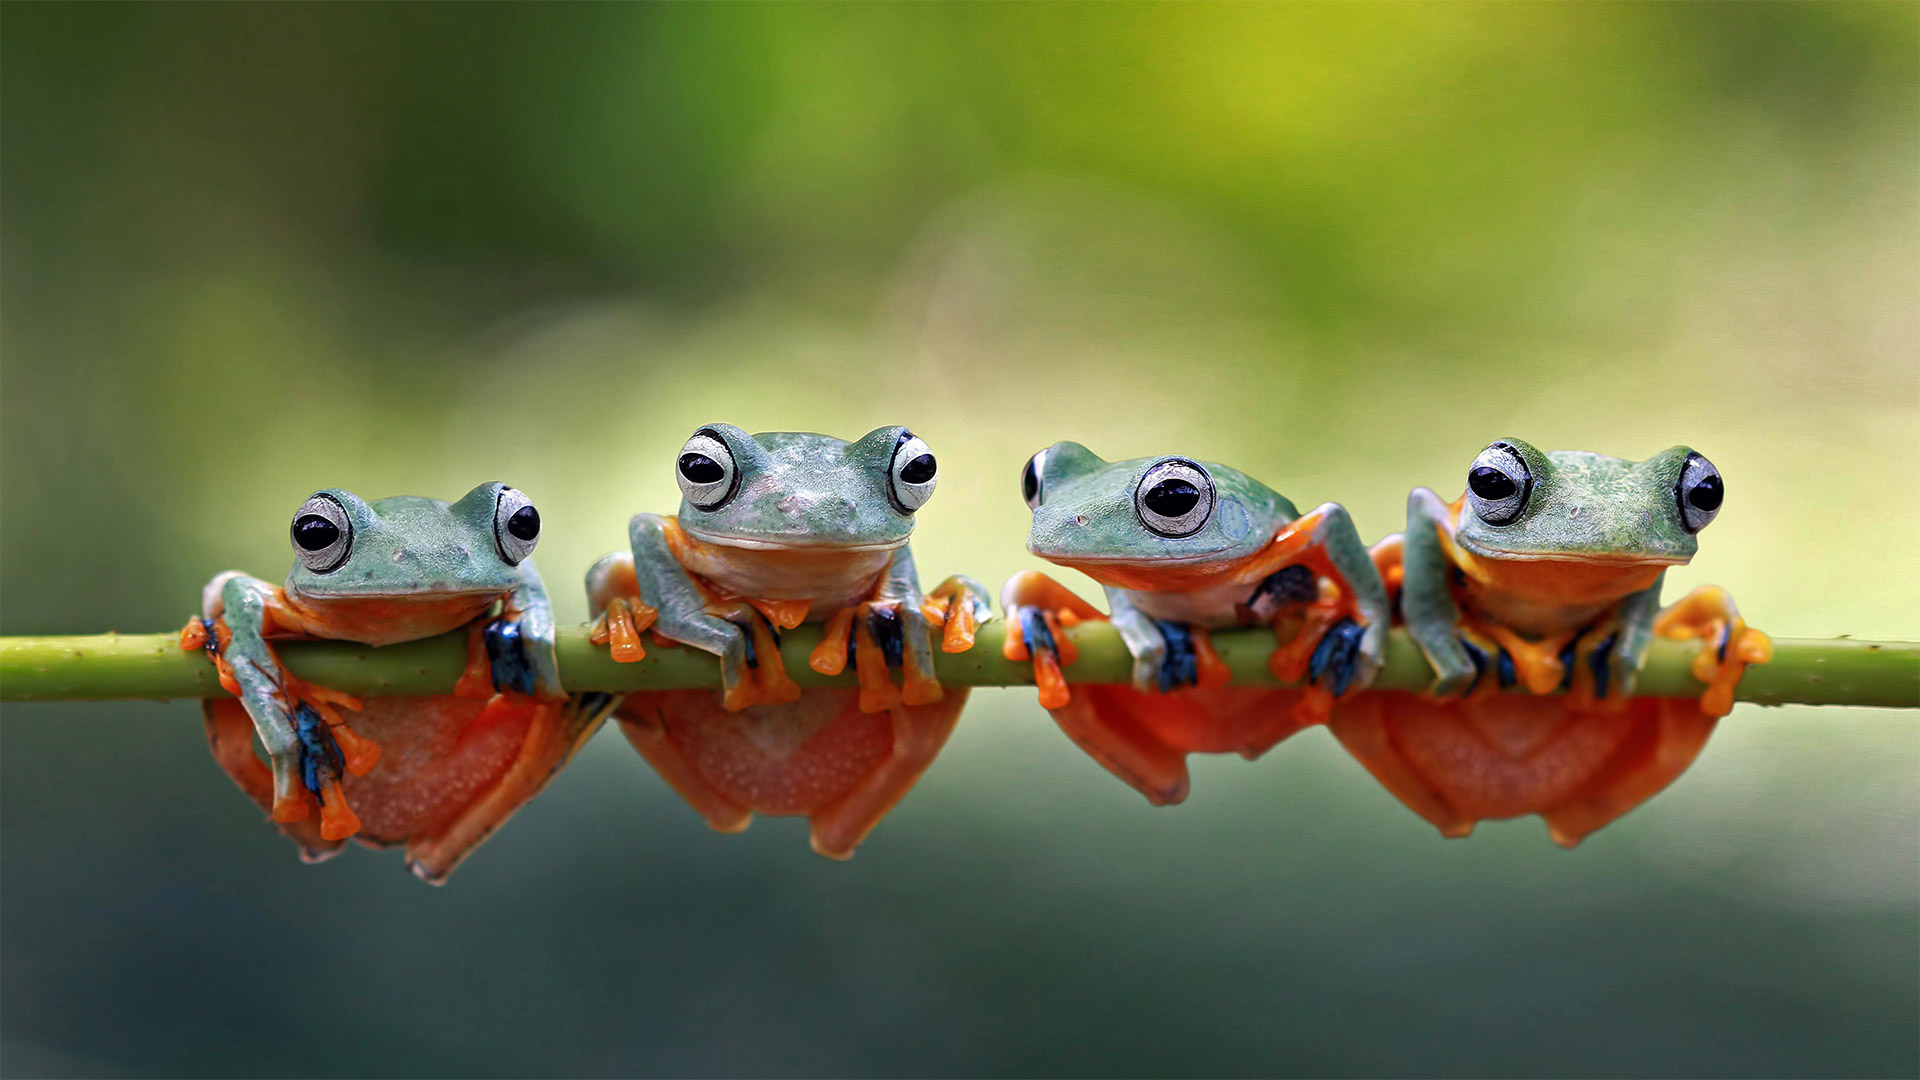 Javan tree frogs sitting together on a stalk in Indonesia - SnapRapid/Offset by Shutterstock)